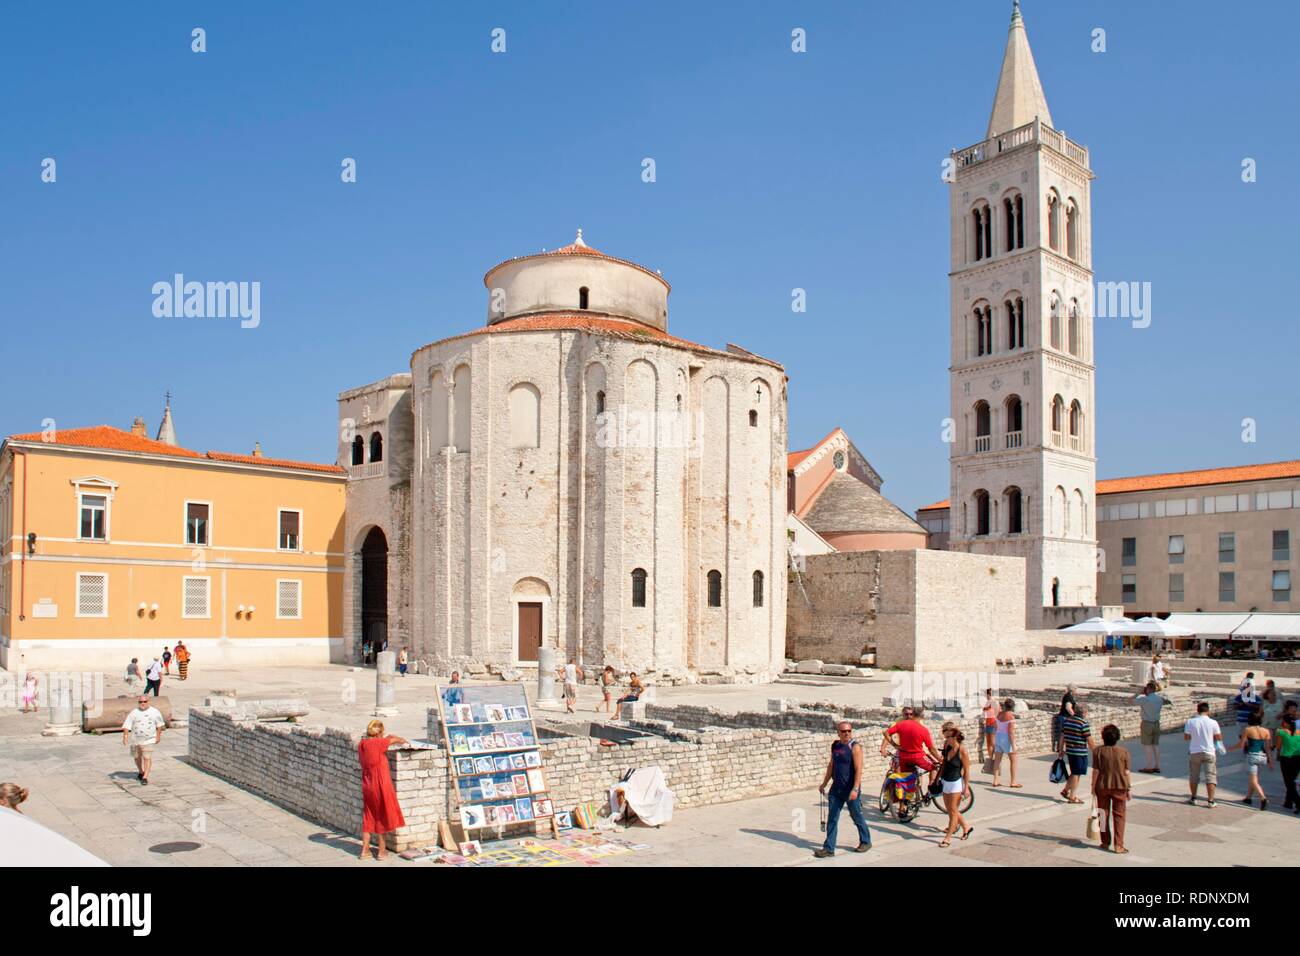 The circular church of St. Donat and the bell tower of St. Anastasia's Cathedral in Zadar, Adriatic Coast, Dalmatia, Croatia Stock Photo